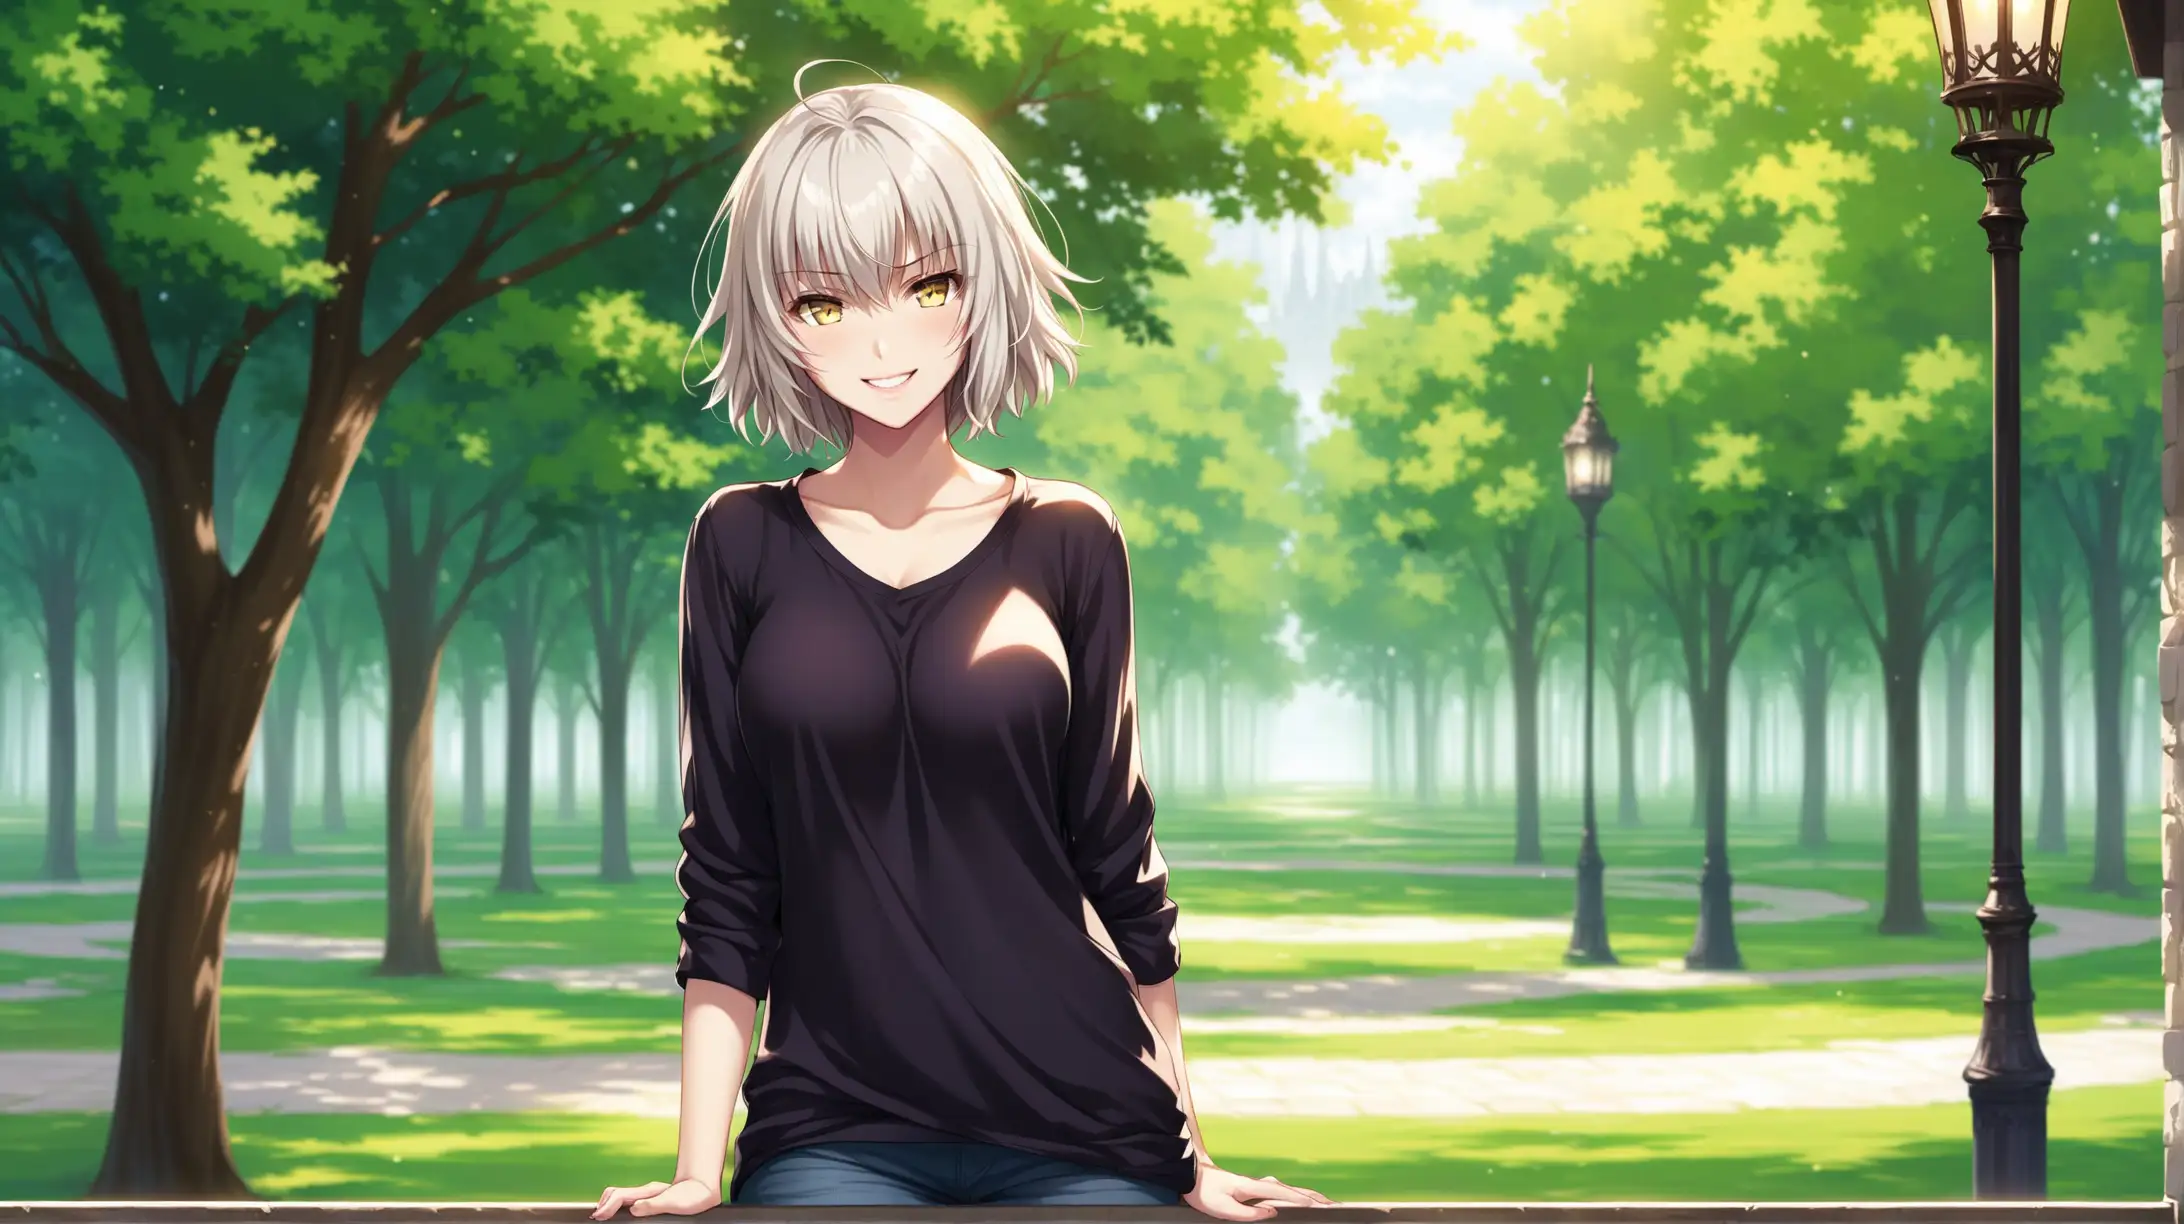 Draw the character Jeanne D'Arc Alter, high quality, natural lighting, long shot, outdoors, standing in a relaxed pose, casual clothing, smiling